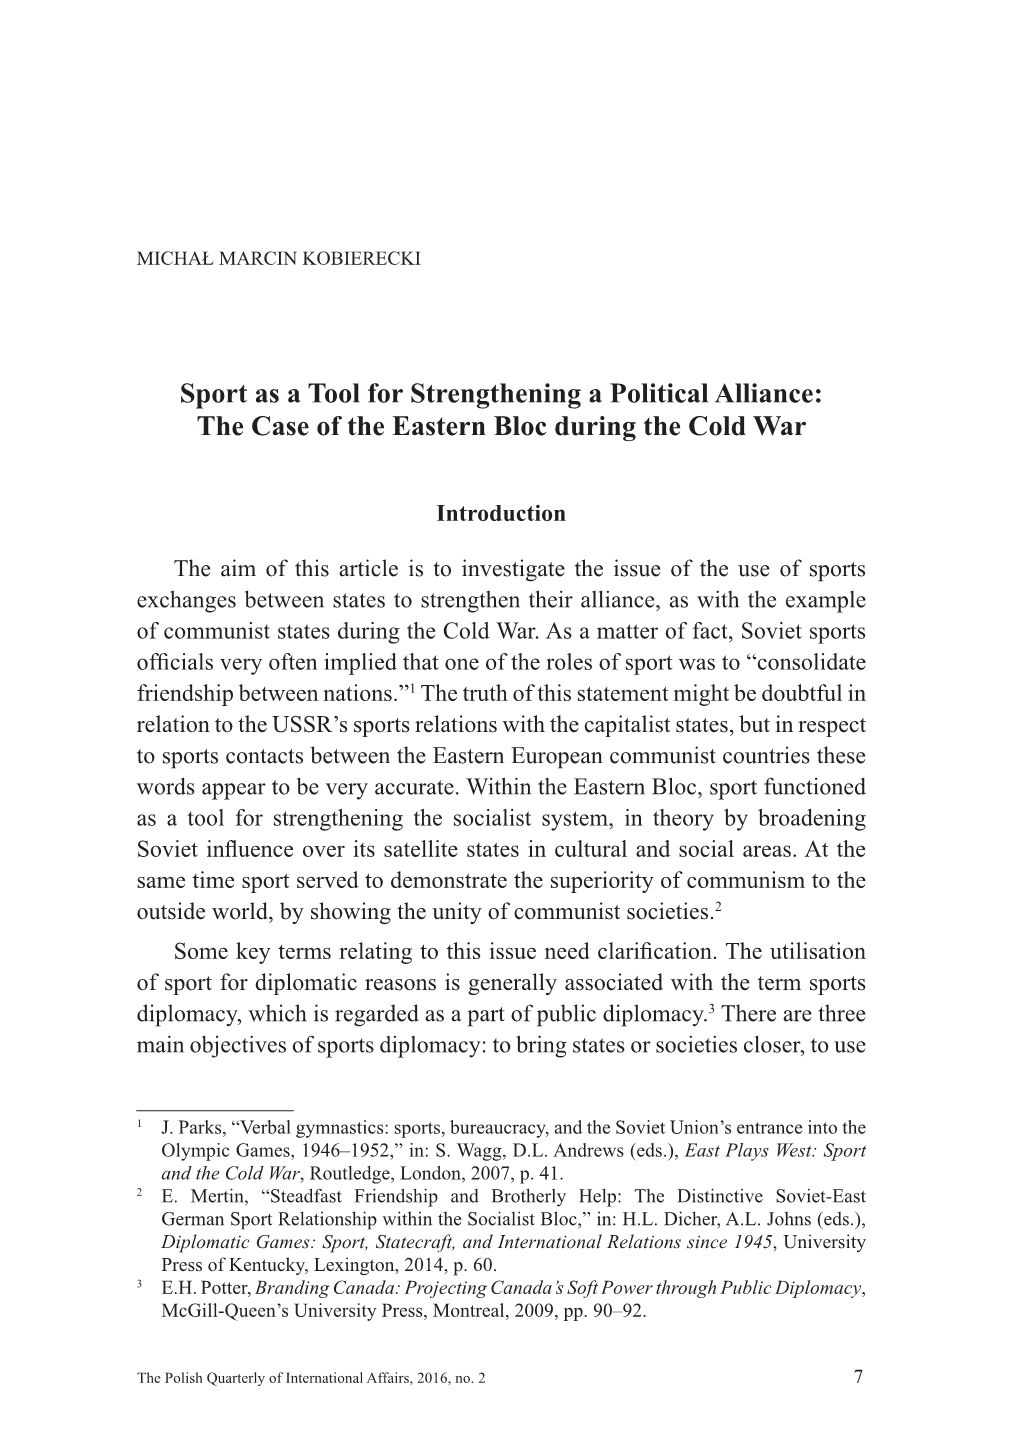 Sport As a Tool for Strengthening a Political Alliance: the Case of the Eastern Bloc During the Cold War